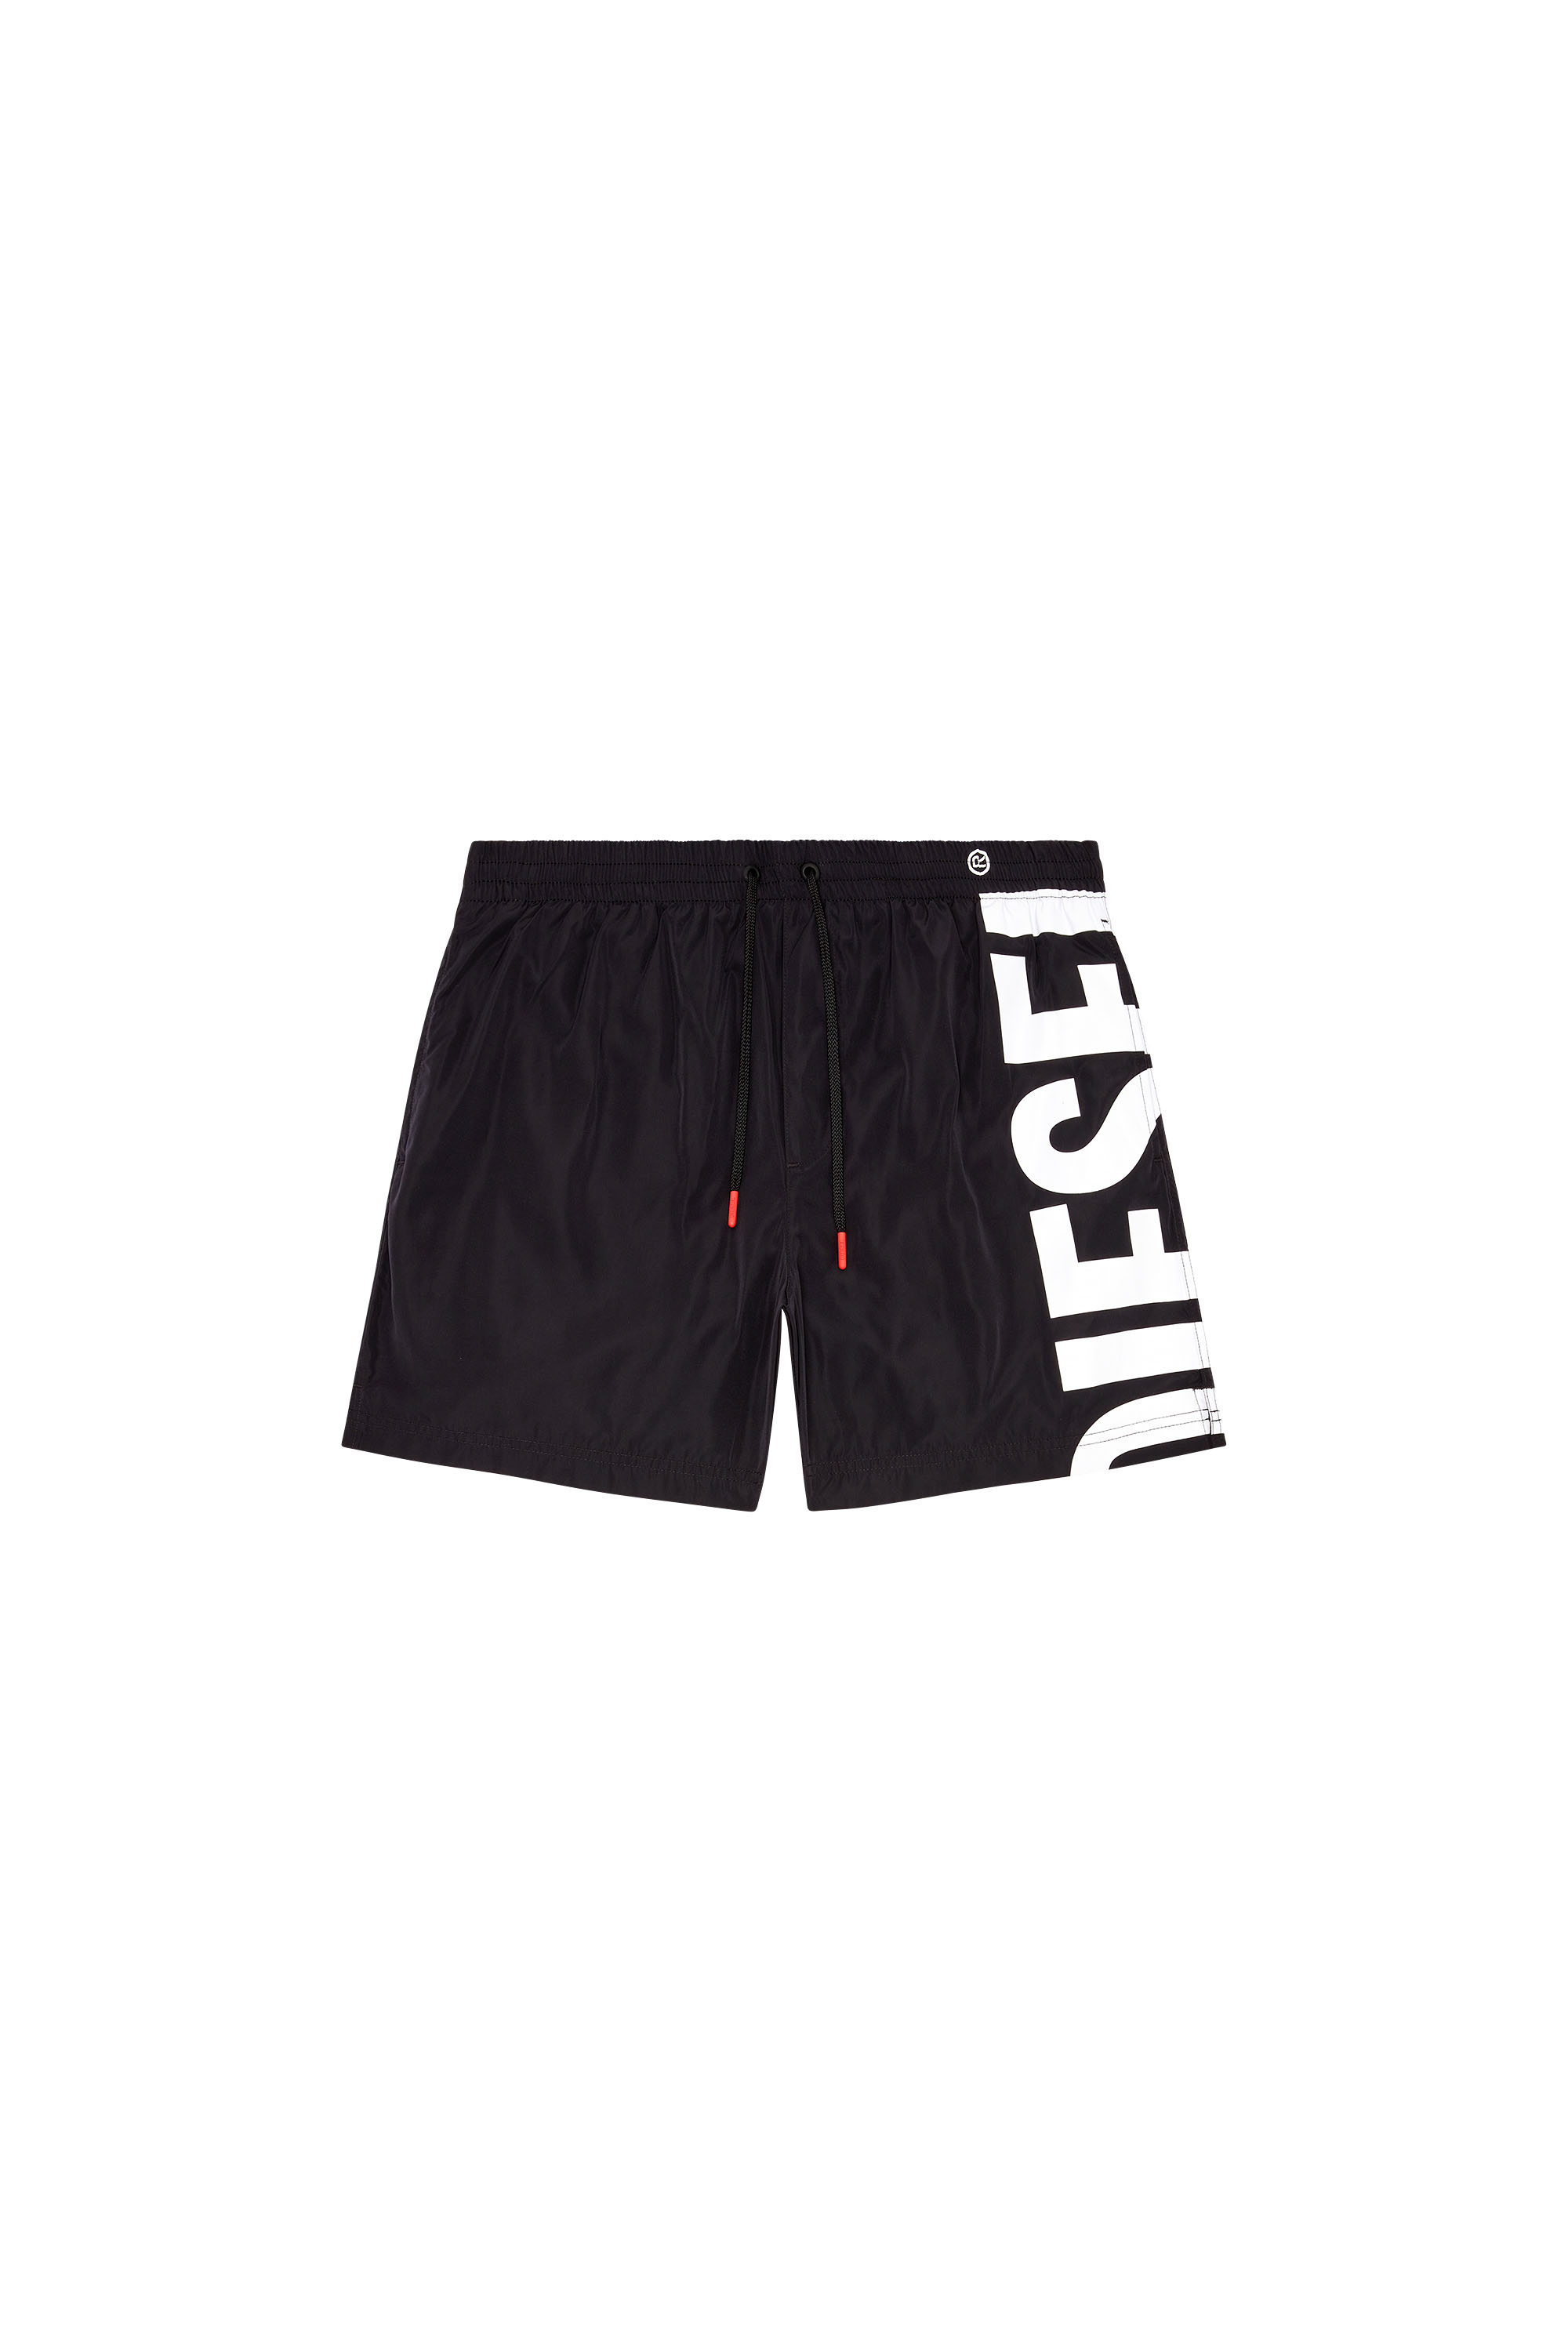 Diesel - BMBX-RIO-41, Man Board shorts with side logo print in Black - Image 4